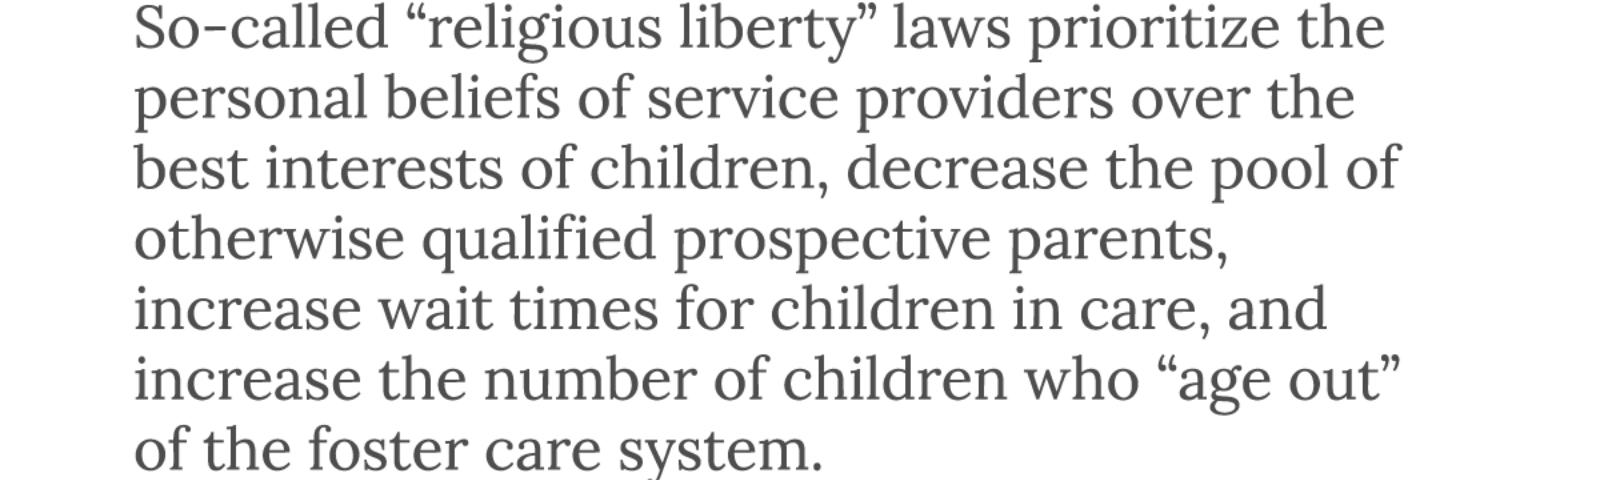 Religious Exemptions for Child Welfare Agencies: A License to Discriminate Against LGBTQ Parents and Children